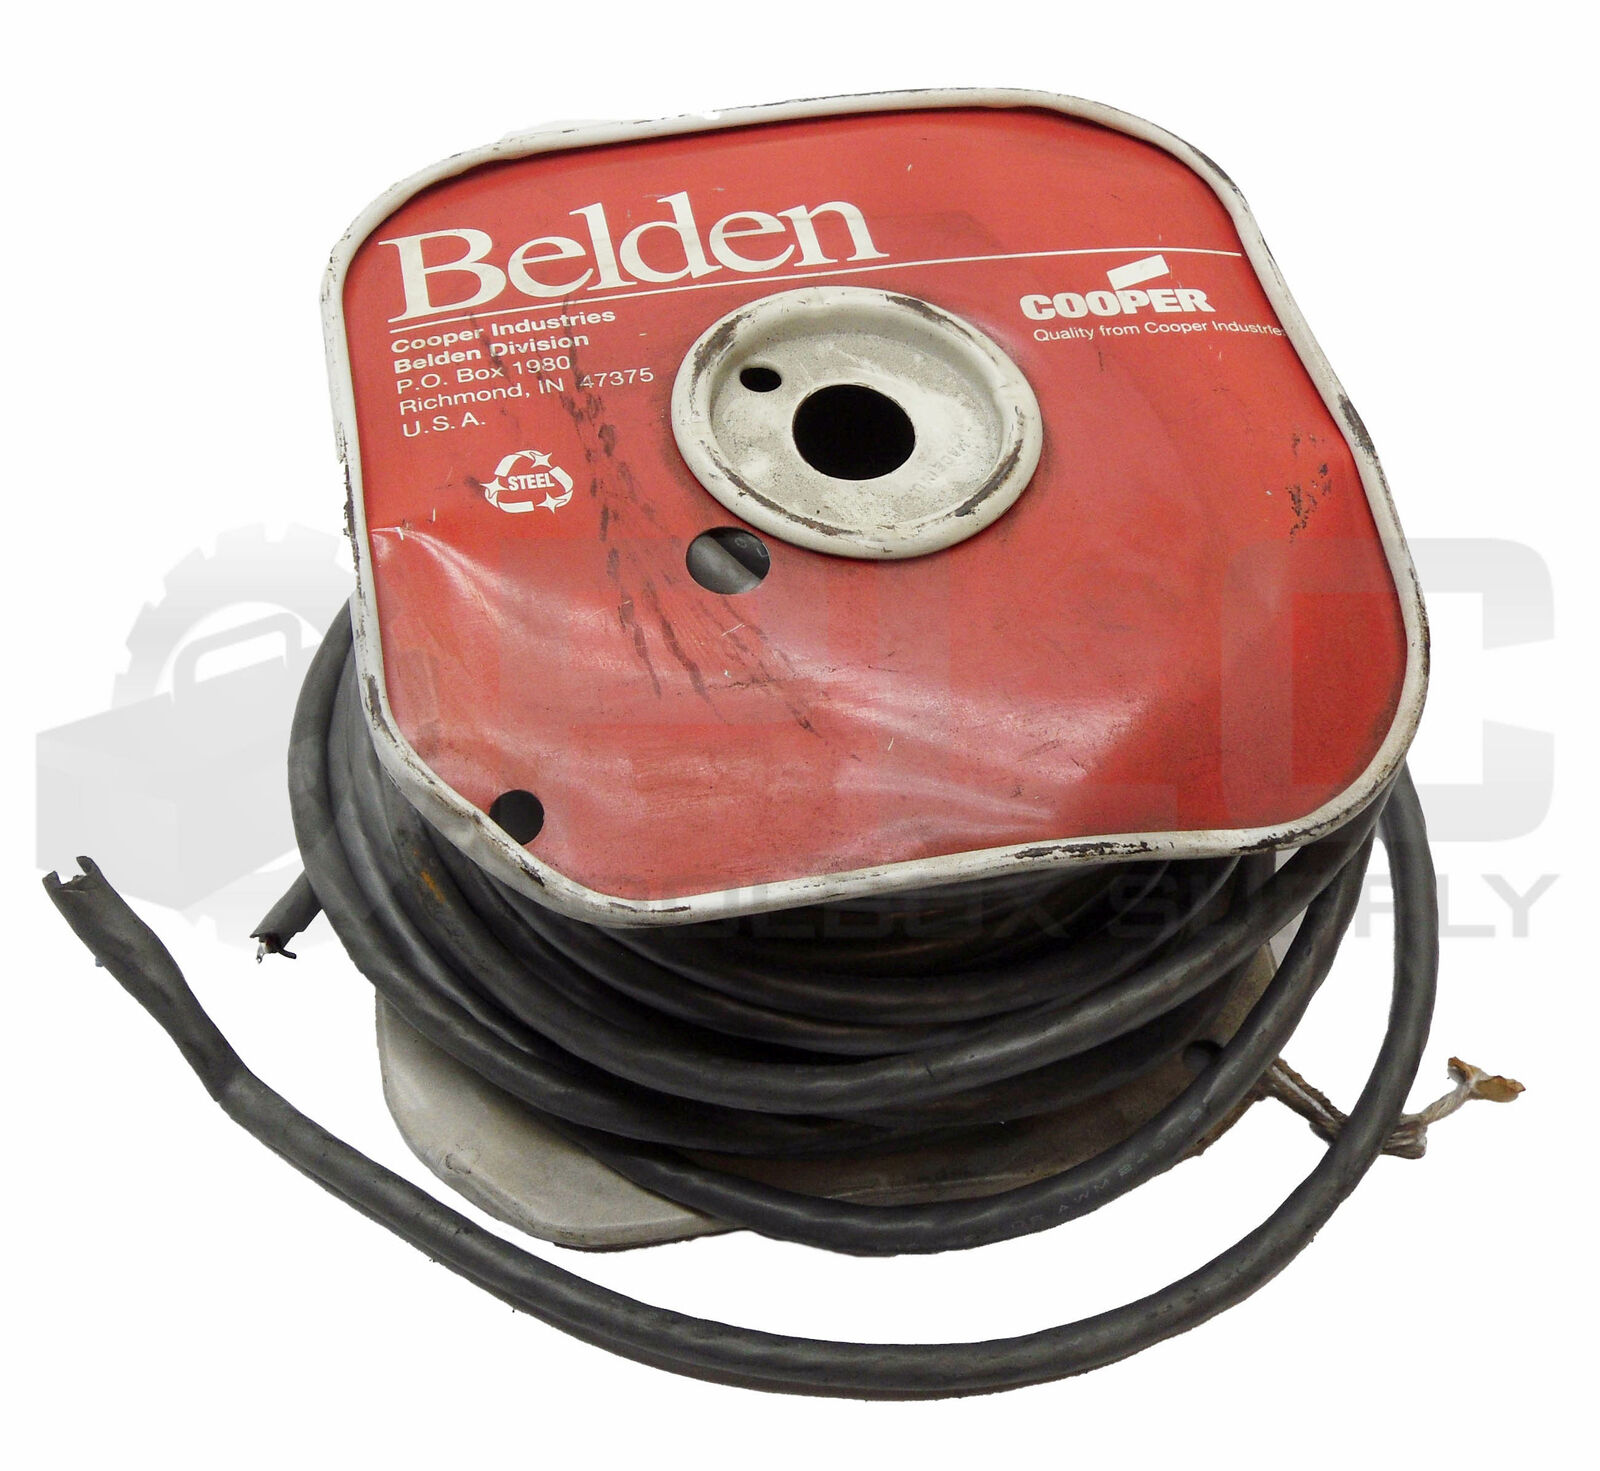 NEW BELDEN 9506 60 SHIELDED COMPUTER CABLE APPROX 85' 24 AWG *READ*